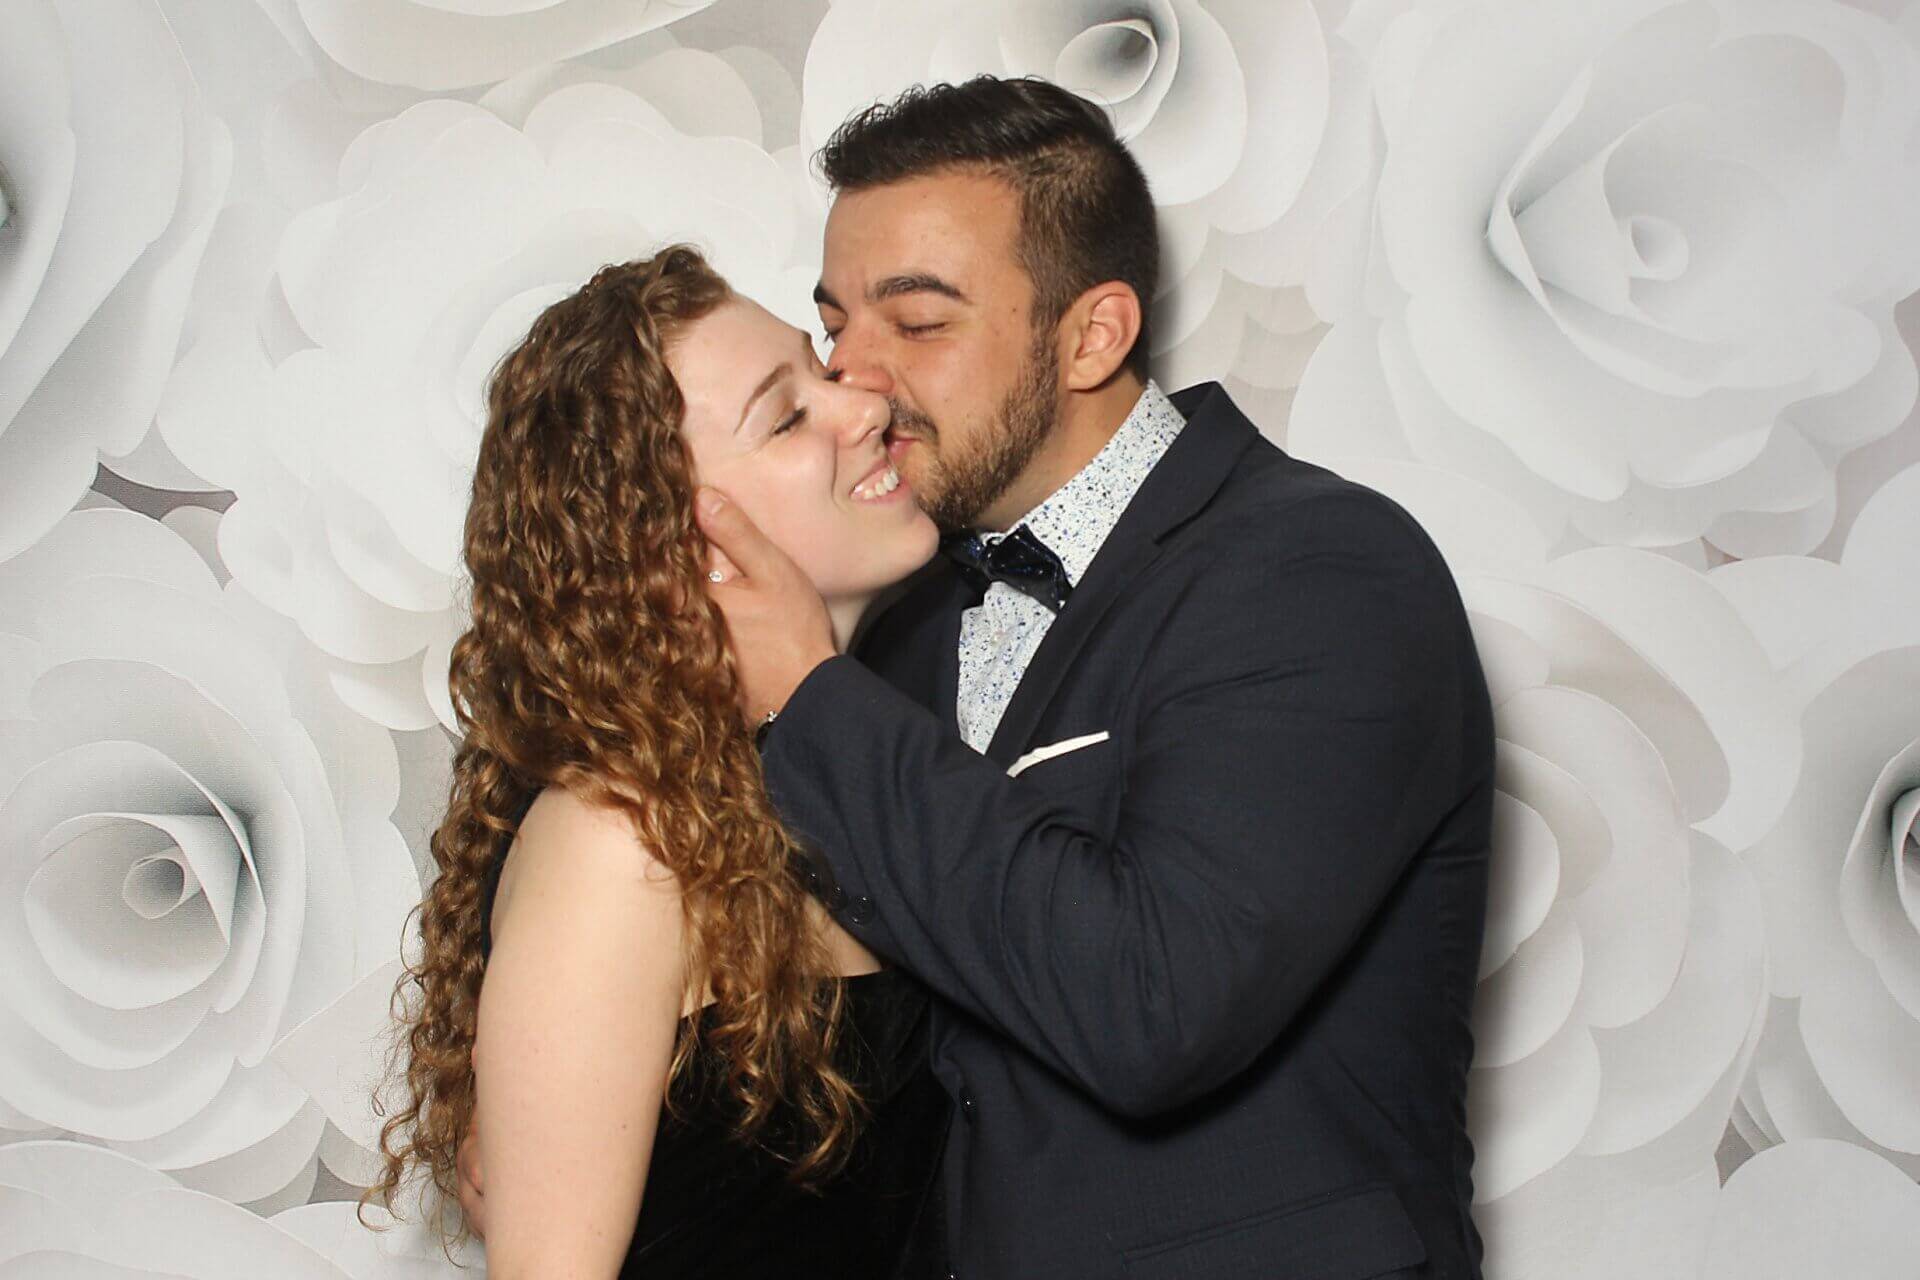 Photo booth rental in Toronto for an event. Posing in front of a 3D white flower wall backdrop offered by LOL Photo Booth. Tags: Event planning ideas, Photo booth prints, high resolution photos, Toronto photo booth rental services. GIFS, Boomerangs, Mosaic Walls, Slow motion, brand activation.